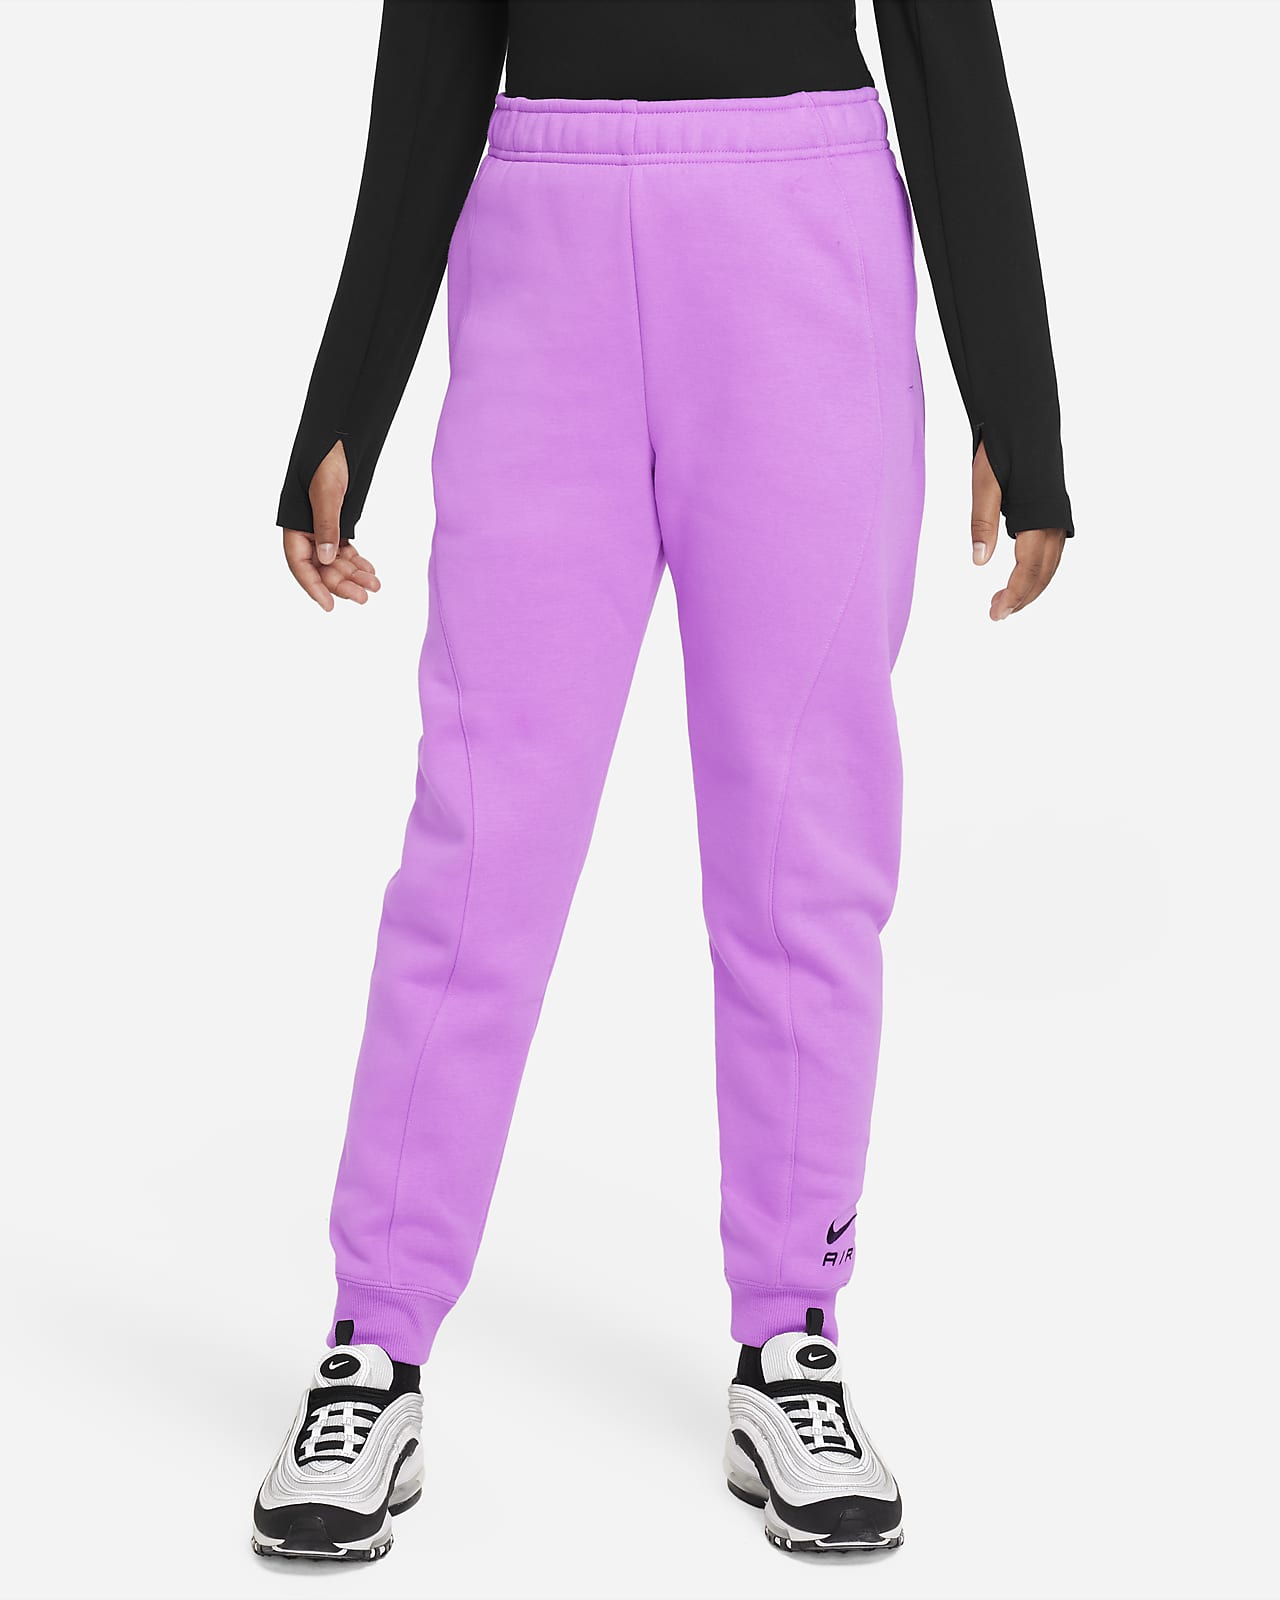 Discover more than 82 girls nike pants latest - in.eteachers